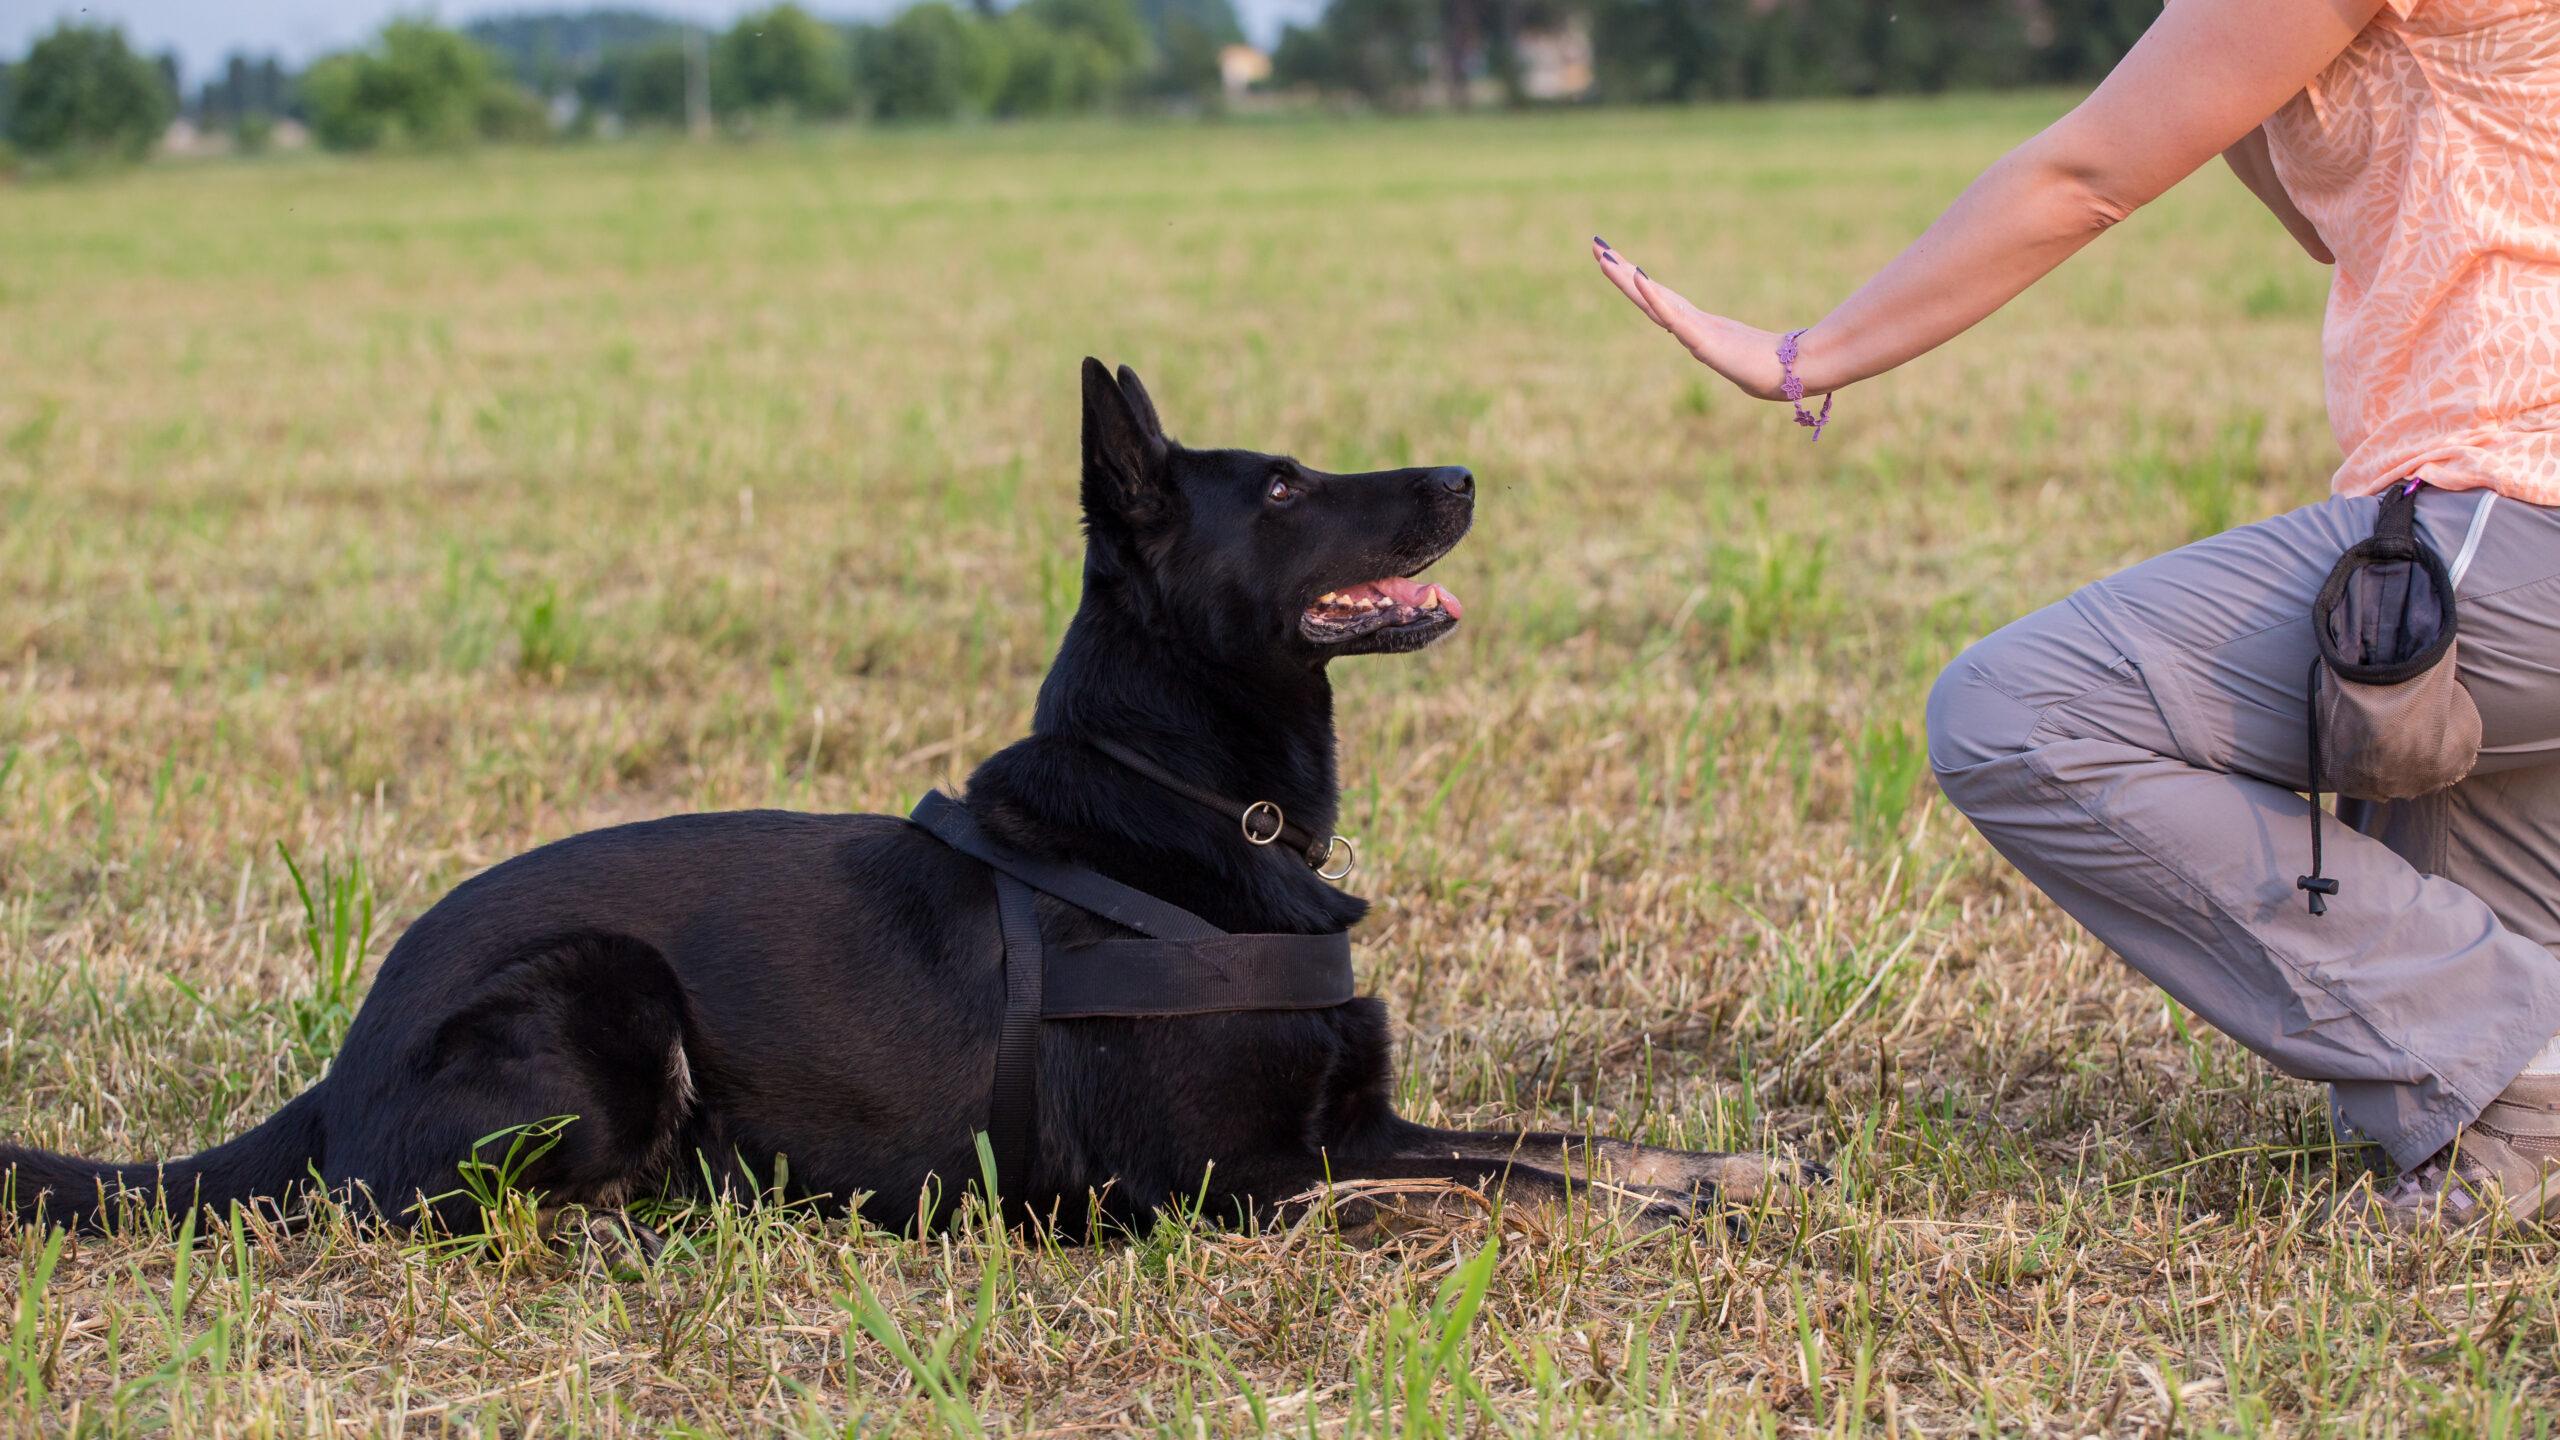 On Command: The Power of Consistent Training in Developing Obedient Dogs